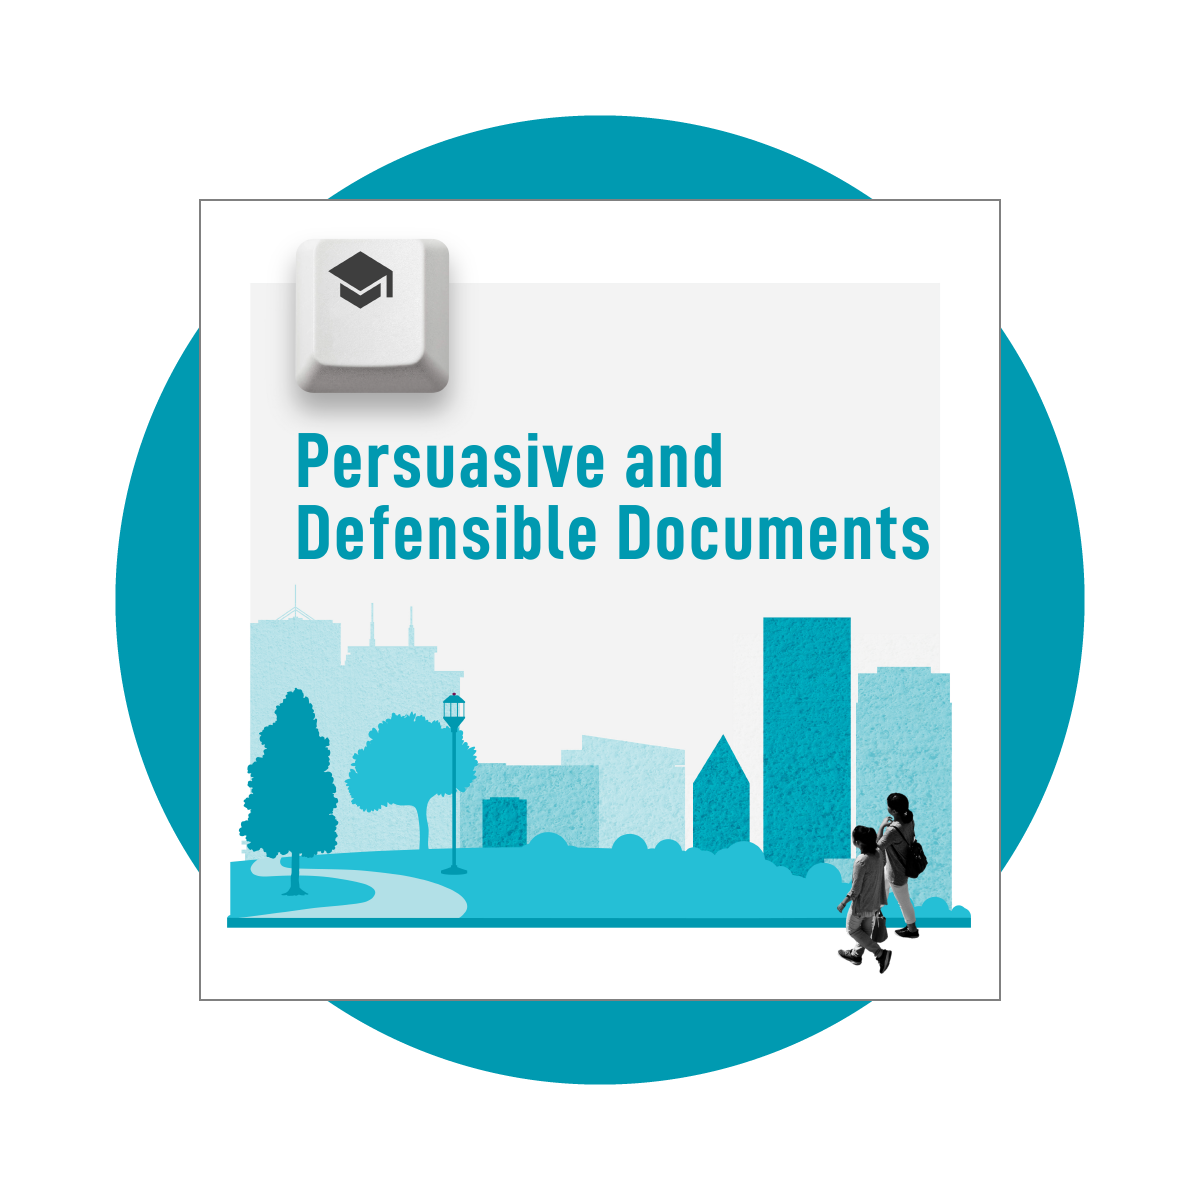 The course page for Persuasive and Defensible Documents.